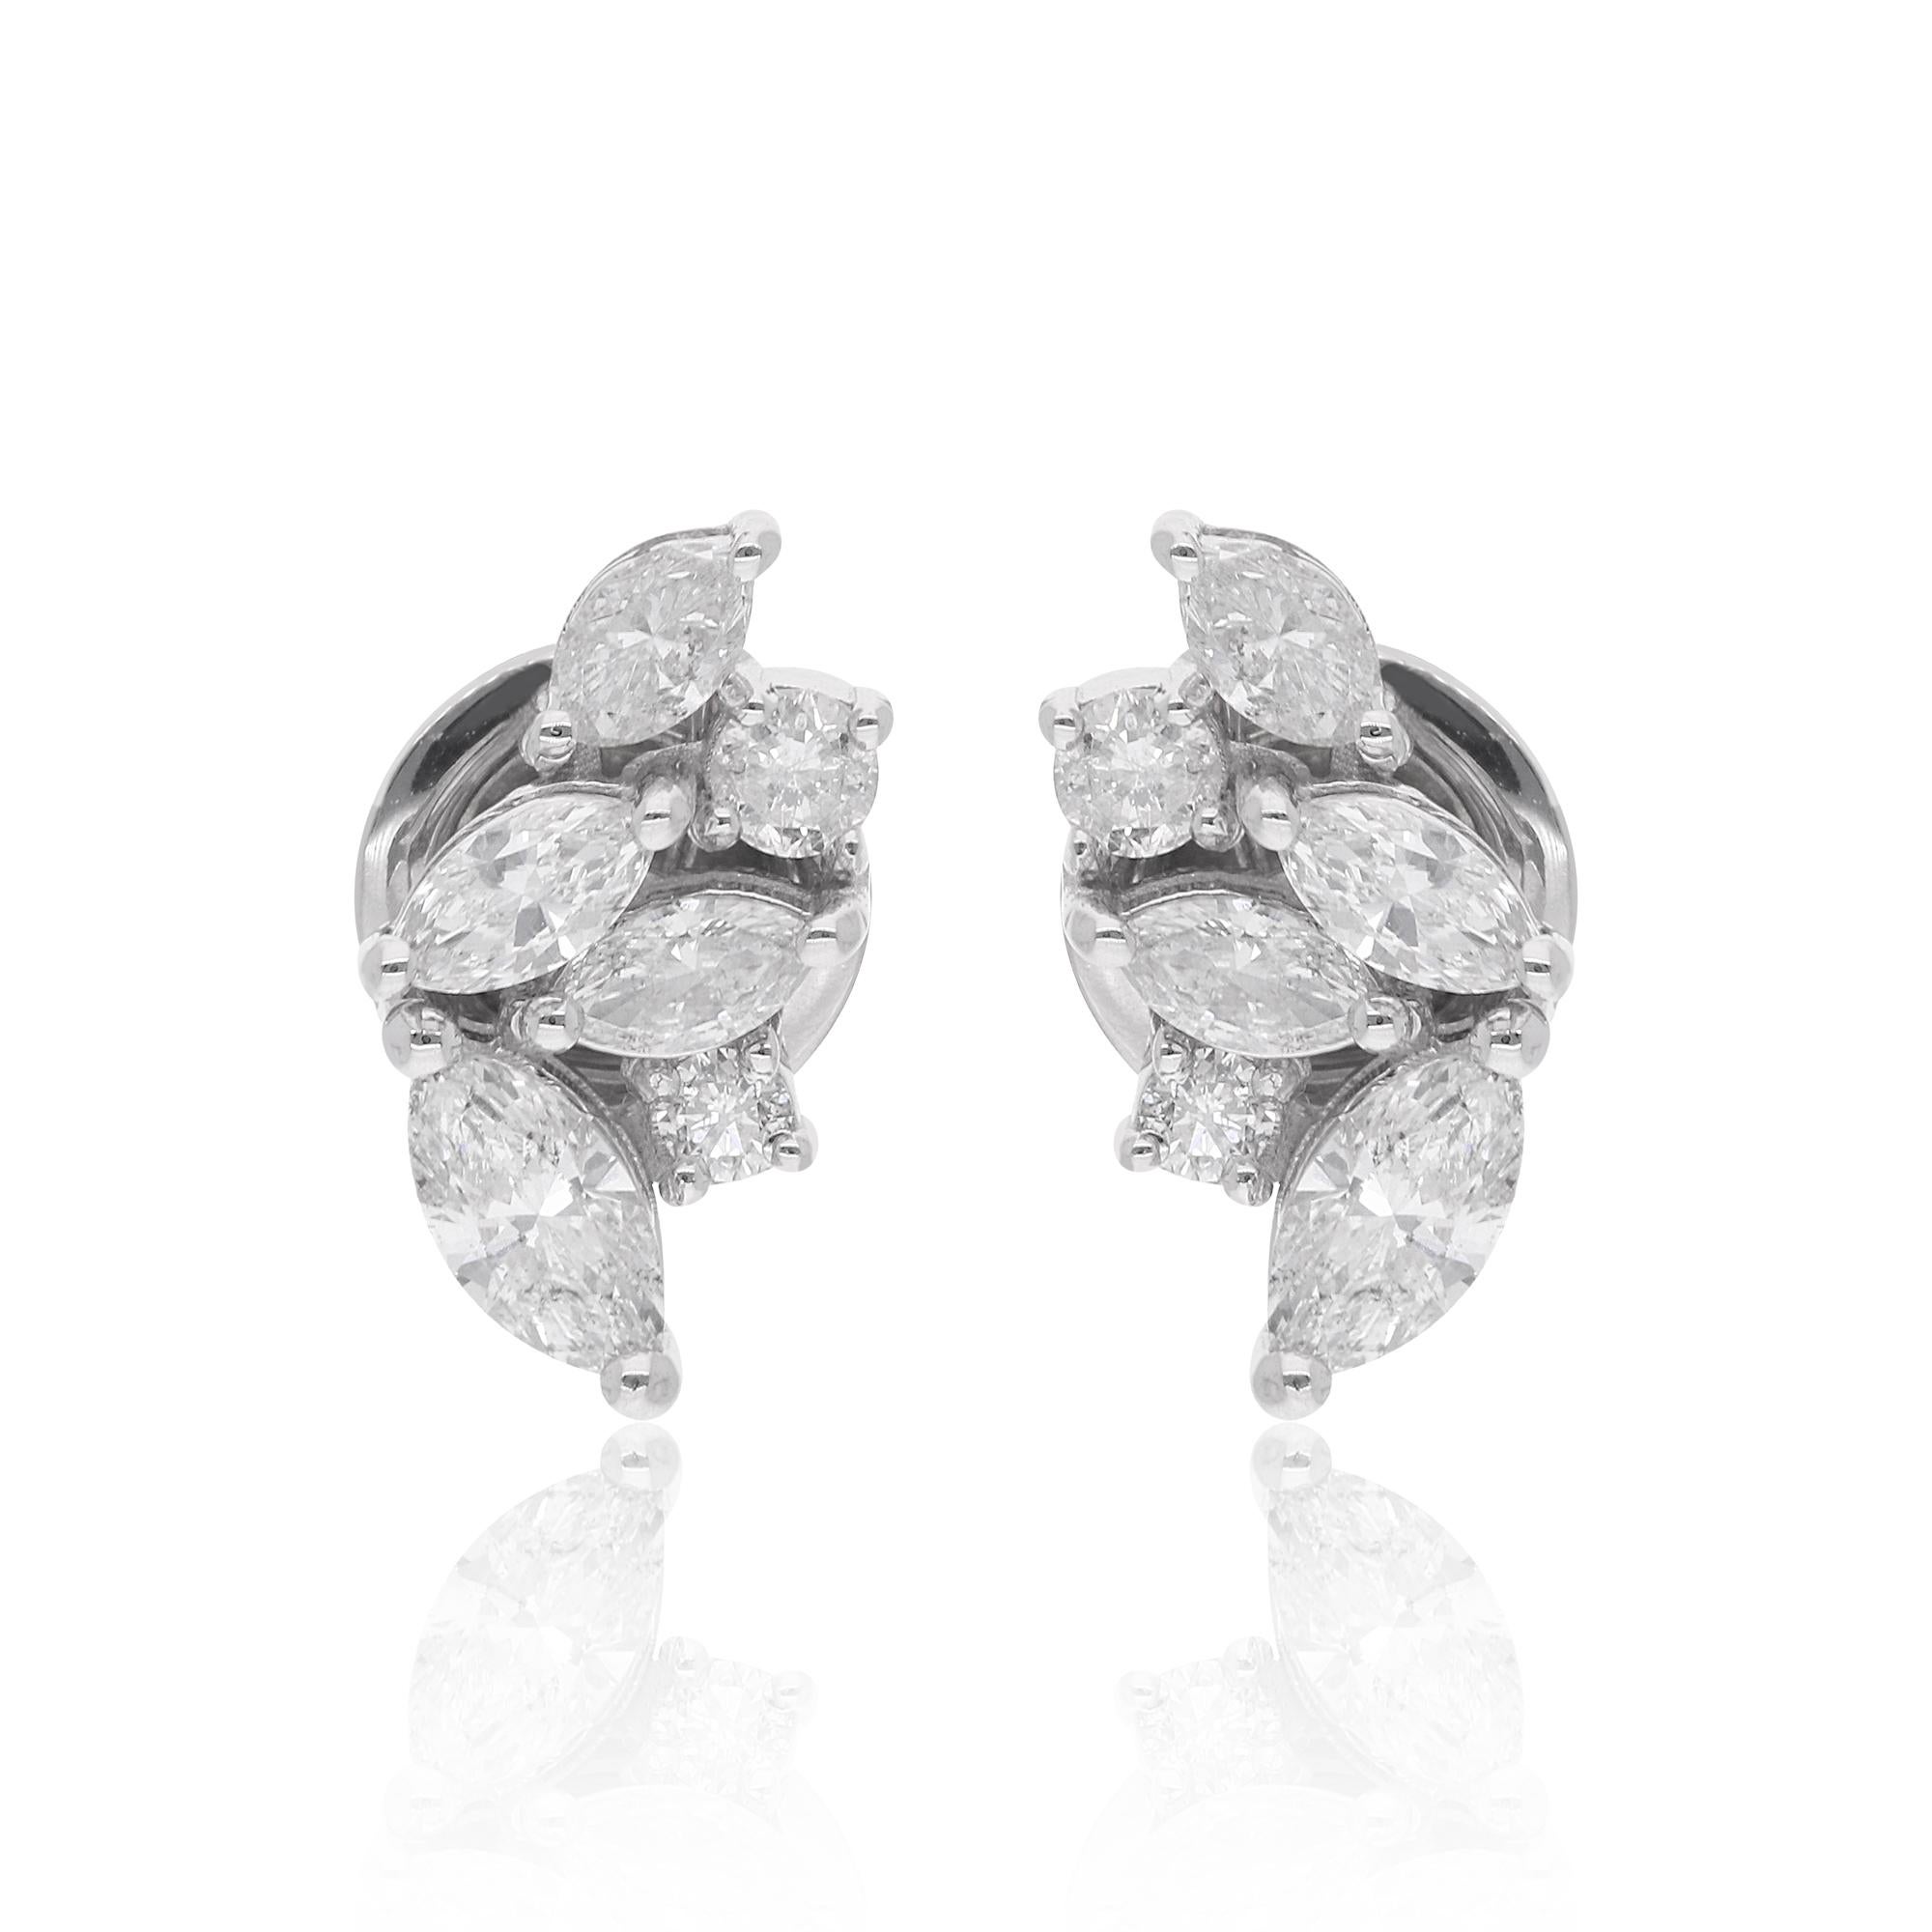 The classic stud design of these earrings makes them versatile and timeless, perfect for any occasion and ensemble. Whether worn as everyday accessories or paired with formal attire, these diamond stud earrings effortlessly elevate any look with